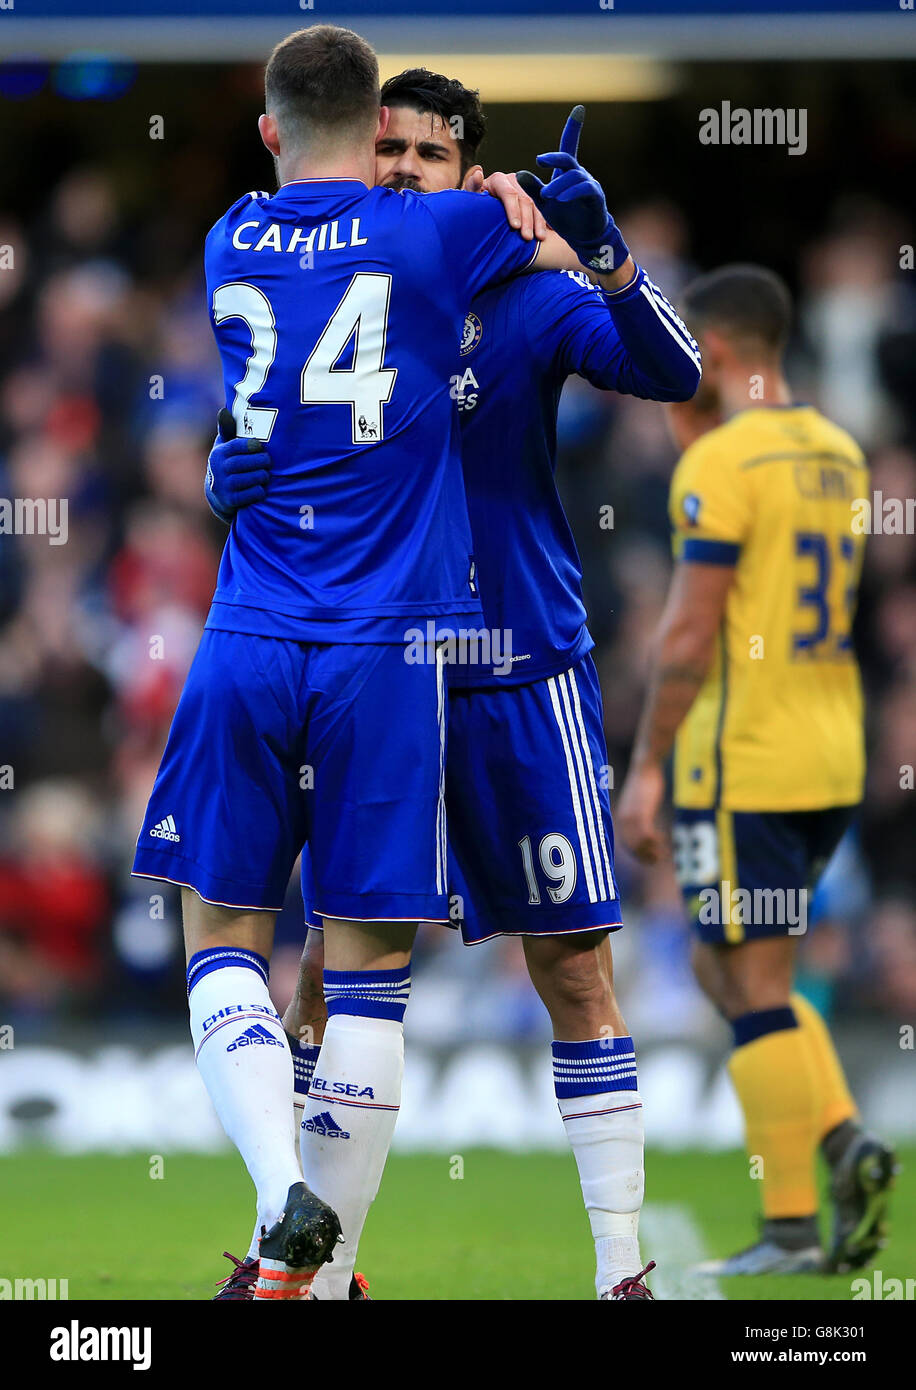 Chelsea's Diego Costa (centre) celebrates scoring their first goal of the game with team-mate Gary Cahill during the Emirates FA Cup, third round match at Stamford Bridge, London. Stock Photo